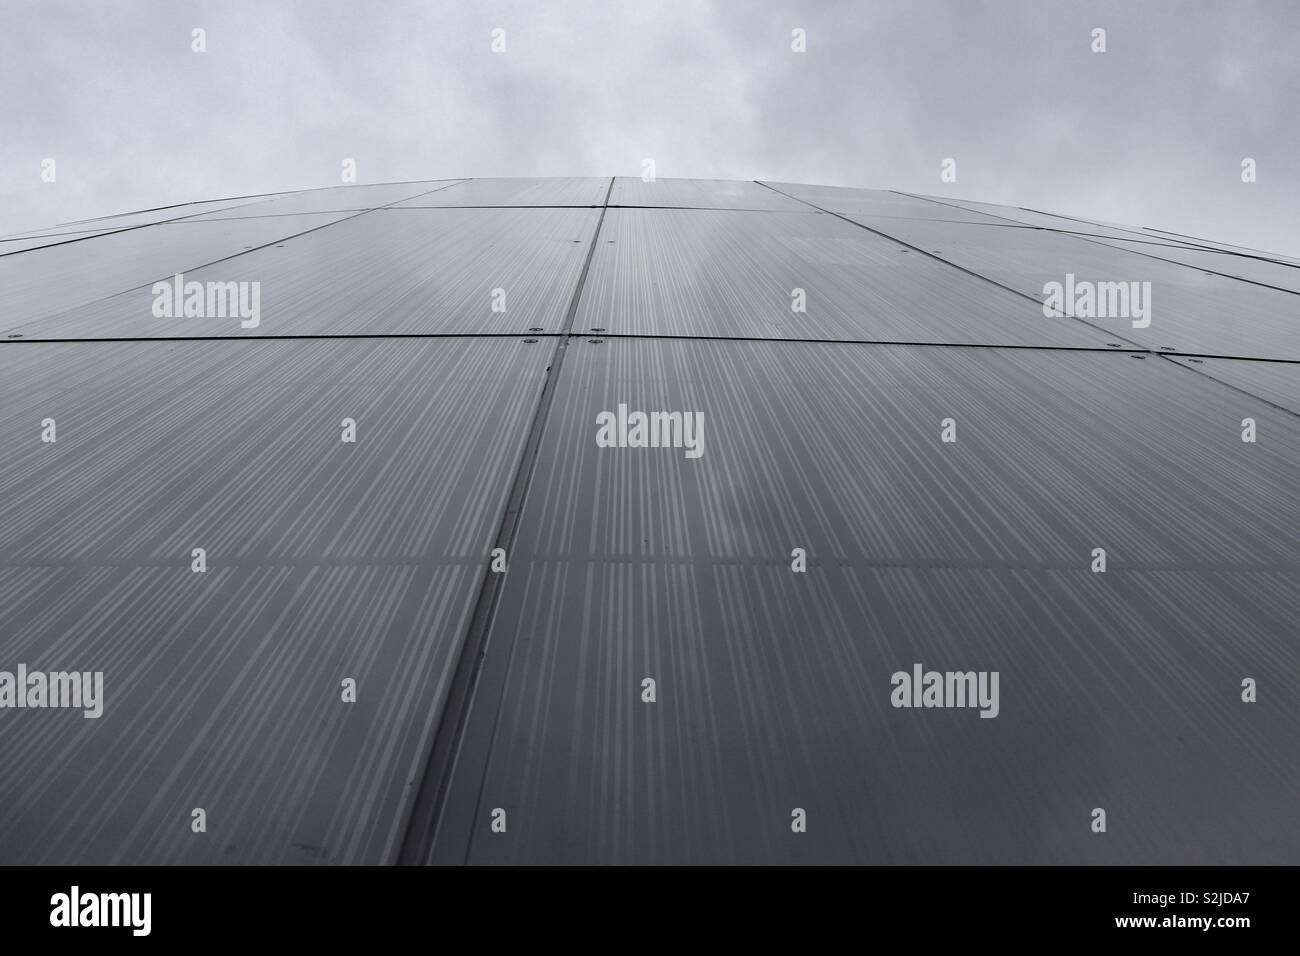 Abstract vertical view of building glass facade Stock Photo